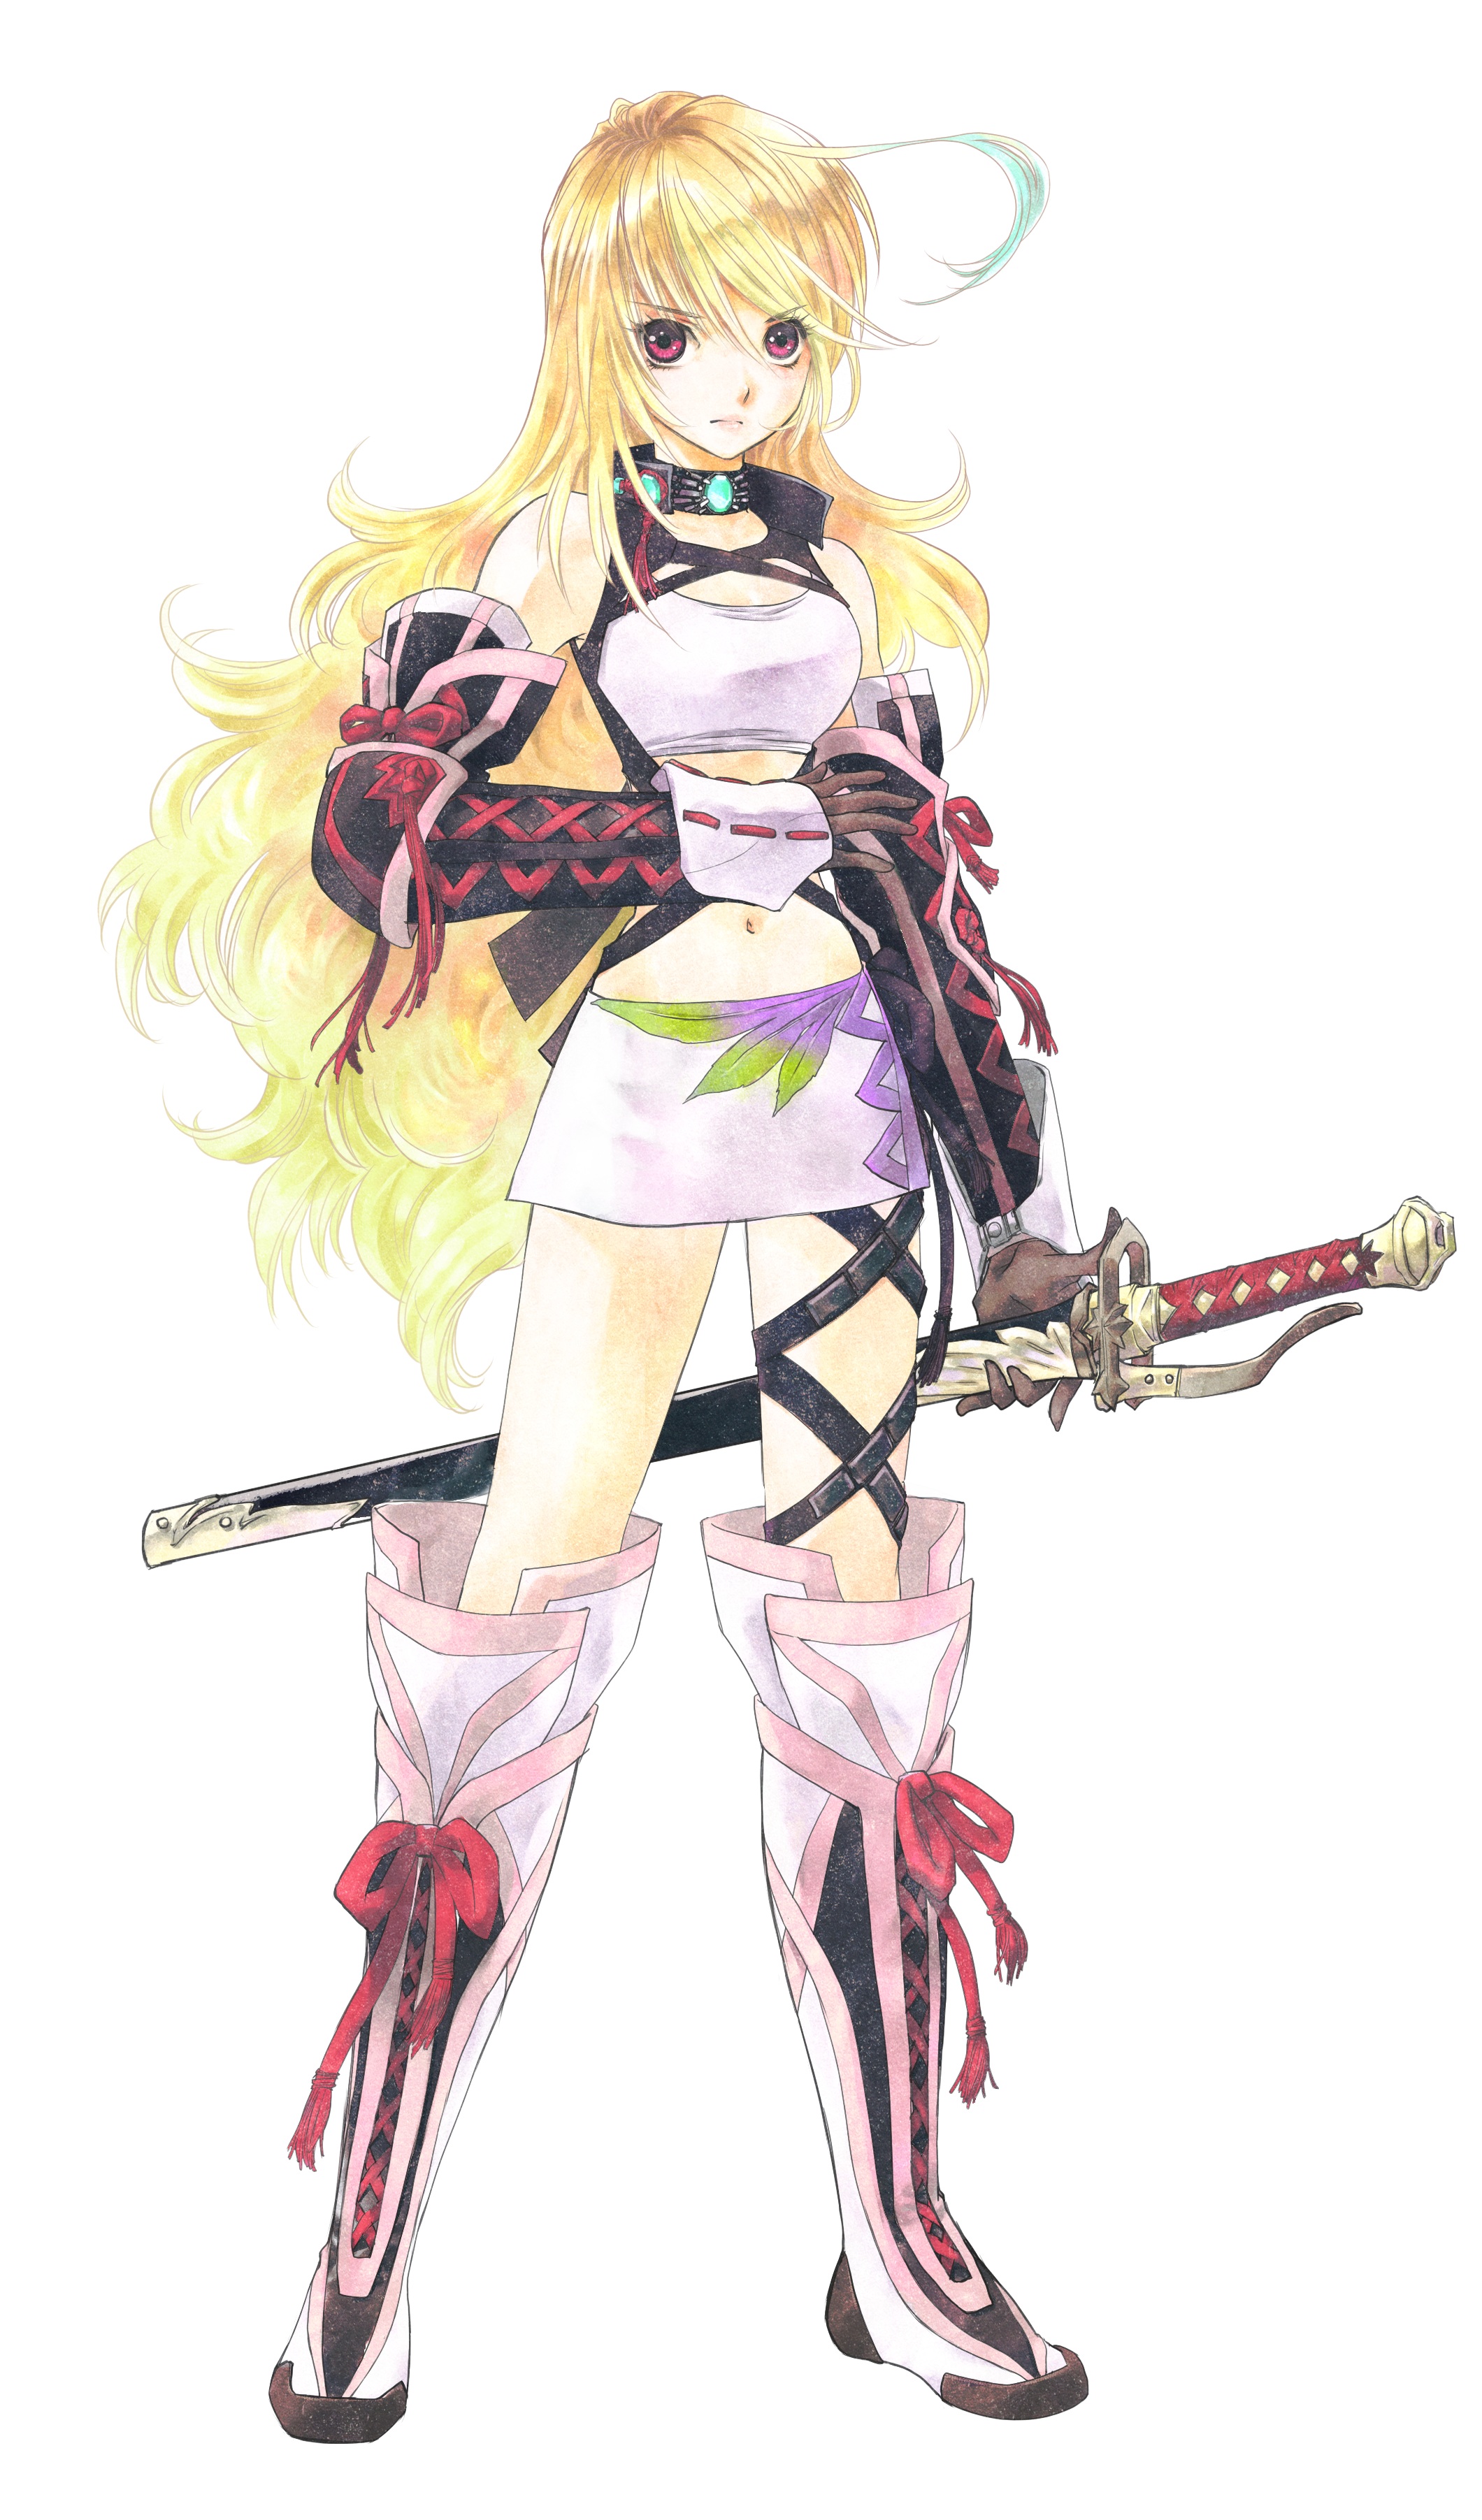 Tales Of Xillia Backgrounds, Compatible - PC, Mobile, Gadgets| 2120x3606 px